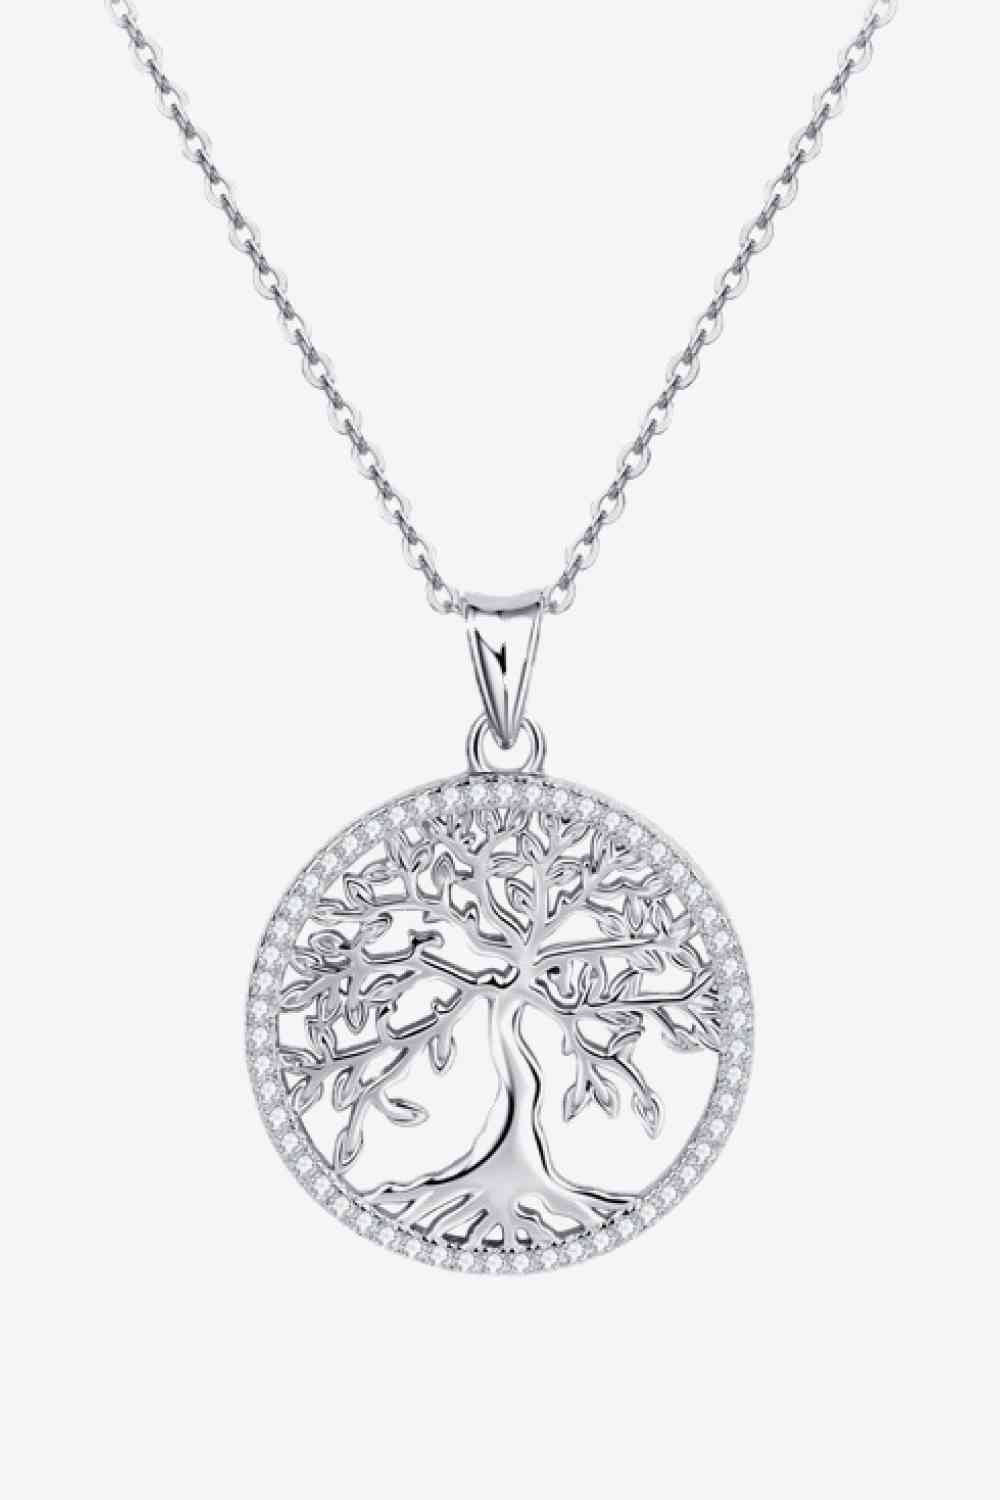 Adored 925 Sterling Silver Moissanite Tree Pendant Necklace - Kings Crown Jewel Boutique